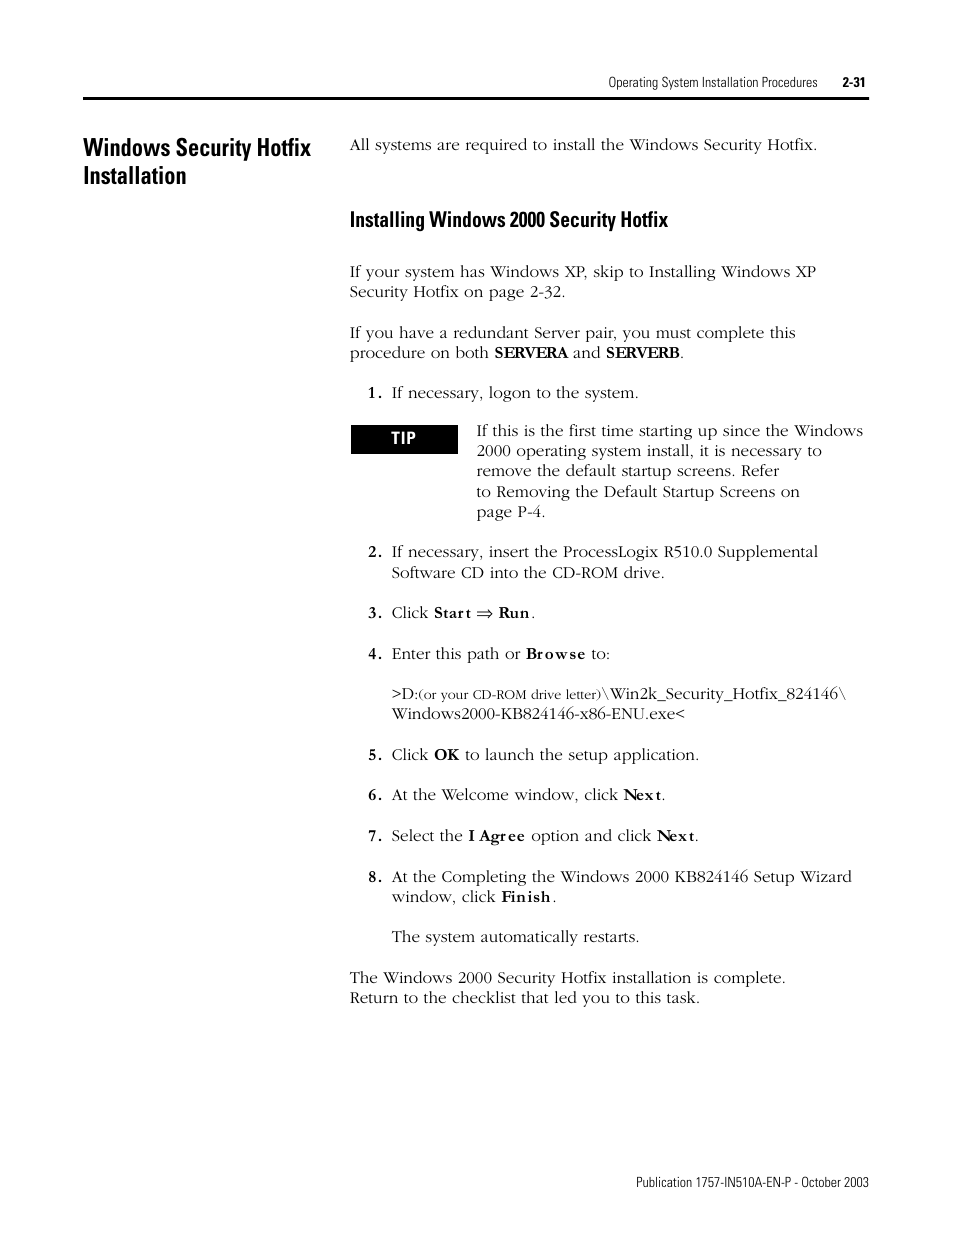 Windows security hotfix installation, Installing windows 2000 security hotfix, Windows security hotfix installation -31 | Installing windows 2000 security hotfix -31 | Rockwell Automation 1757-SWKIT5100 ProcessLogix R510.0 Installation and Upgrade Guide User Manual | Page 51 / 271